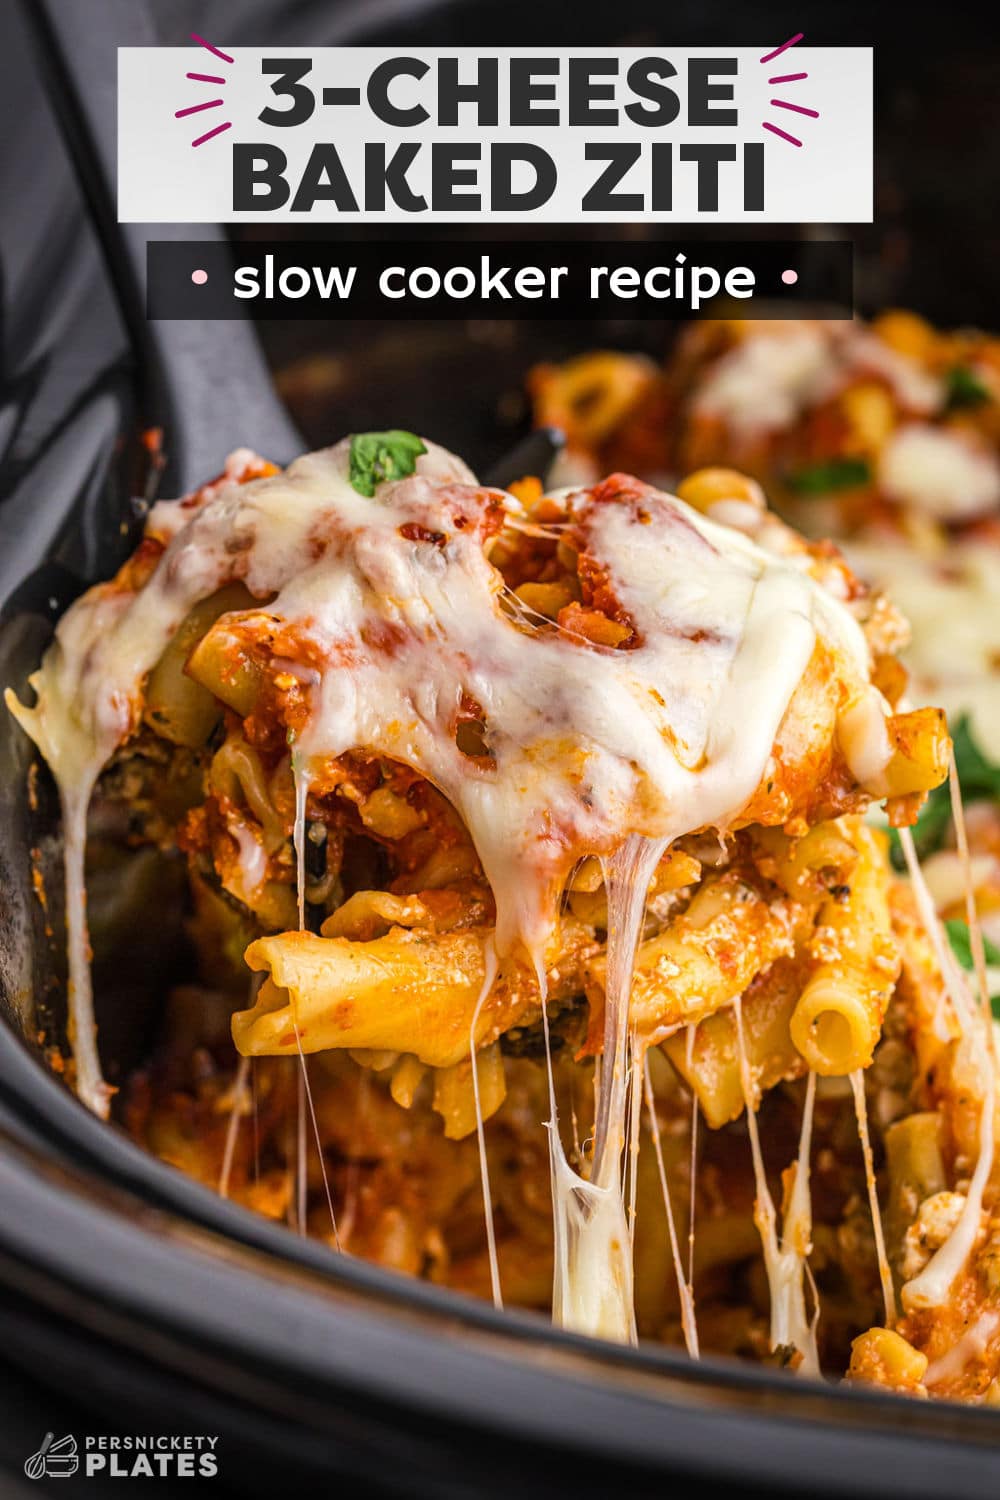 Now it’s easier than ever to make baked ziti - right in the slow cooker! Layered with tasty marinara sauce, uncooked pasta noodles, and a seasoned cheese mixture, this crockpot comfort food is a dump-and-set recipe that the whole family will love! | www.persnicketyplates.com